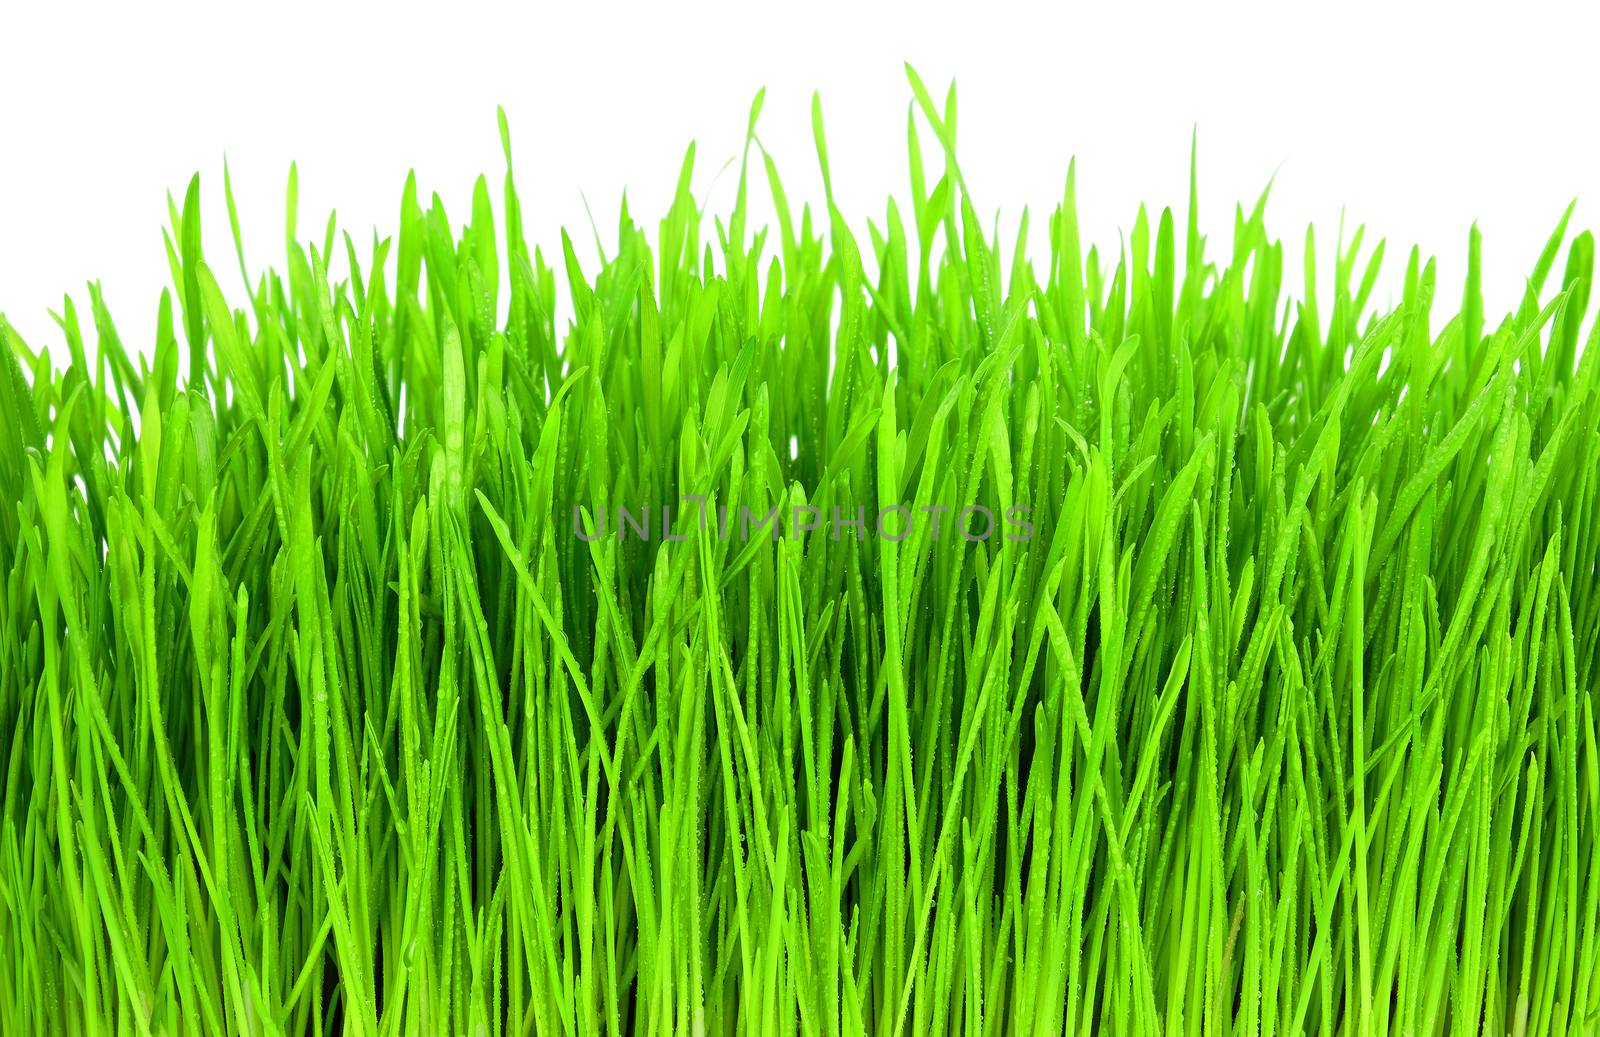 Wet green grass isolation on the white backgrounds by leventina